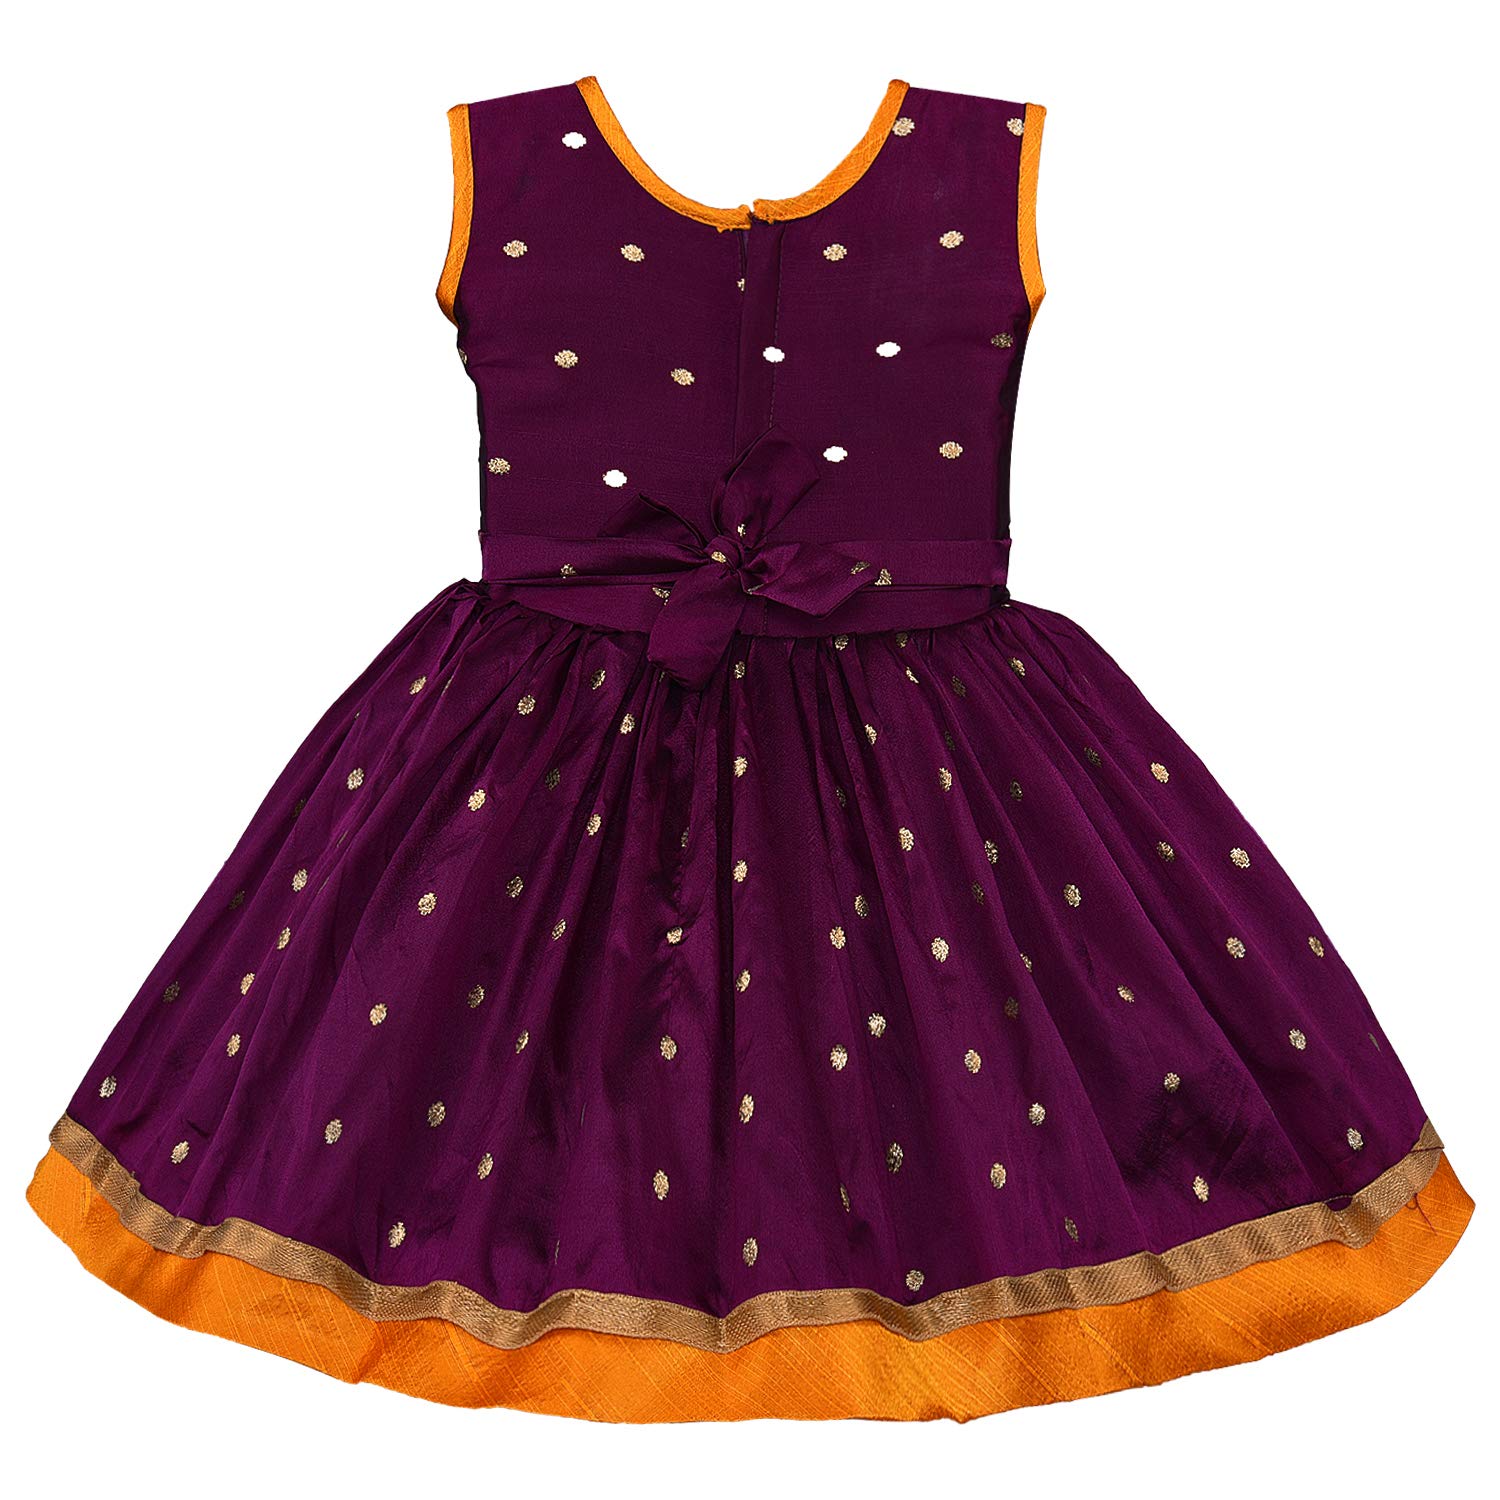 Baby Girls Party Wear Frock Birthday Dress For Girls fe2446own - Wish Karo Party Wear - frocks Party Wear - baby dress